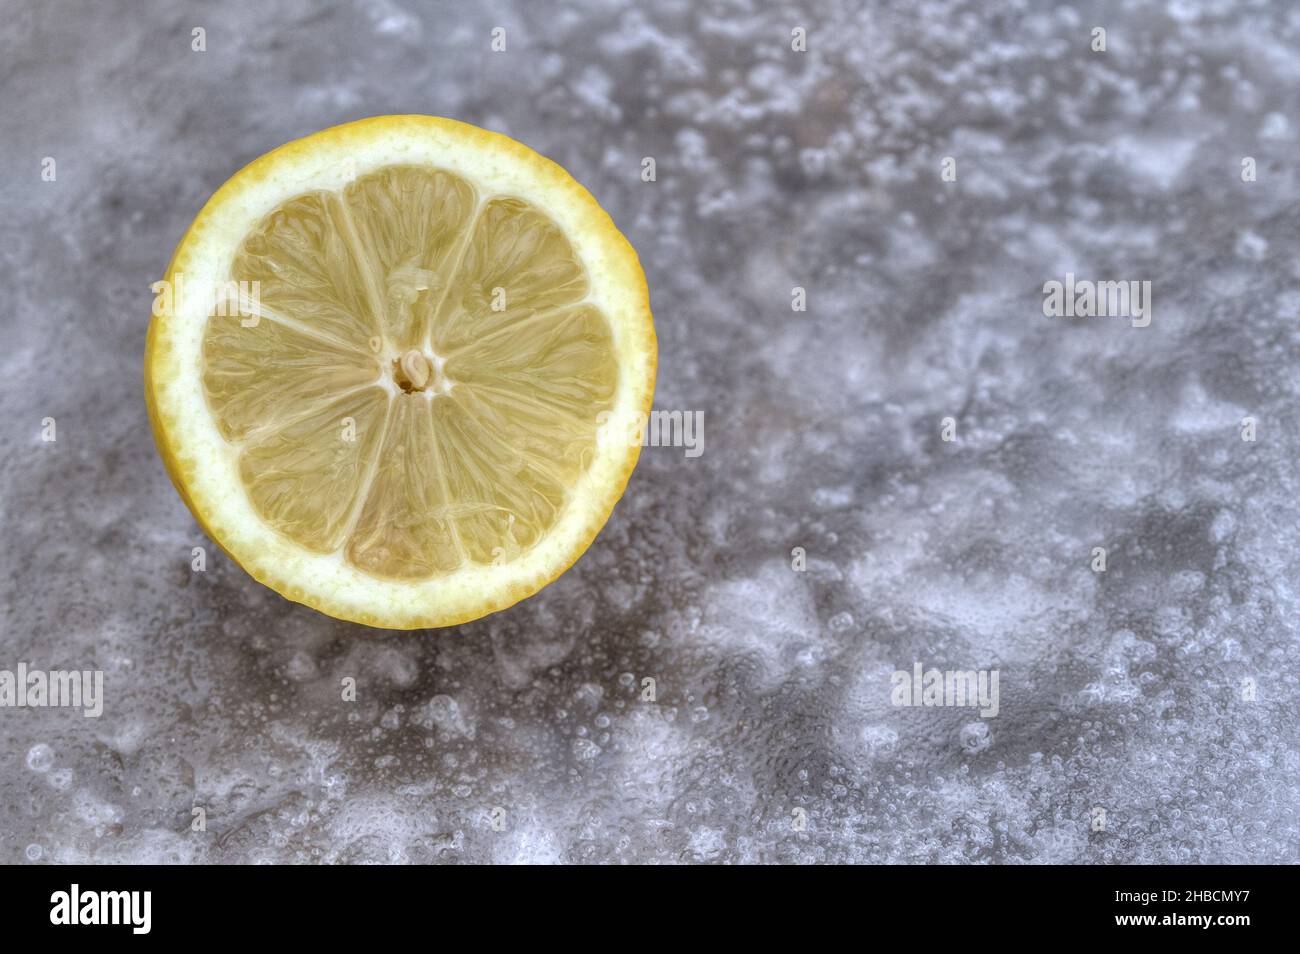 Half a lemon on an icy surface. Lemons are healthy because they contain a lot of vitamin C. Stock Photo